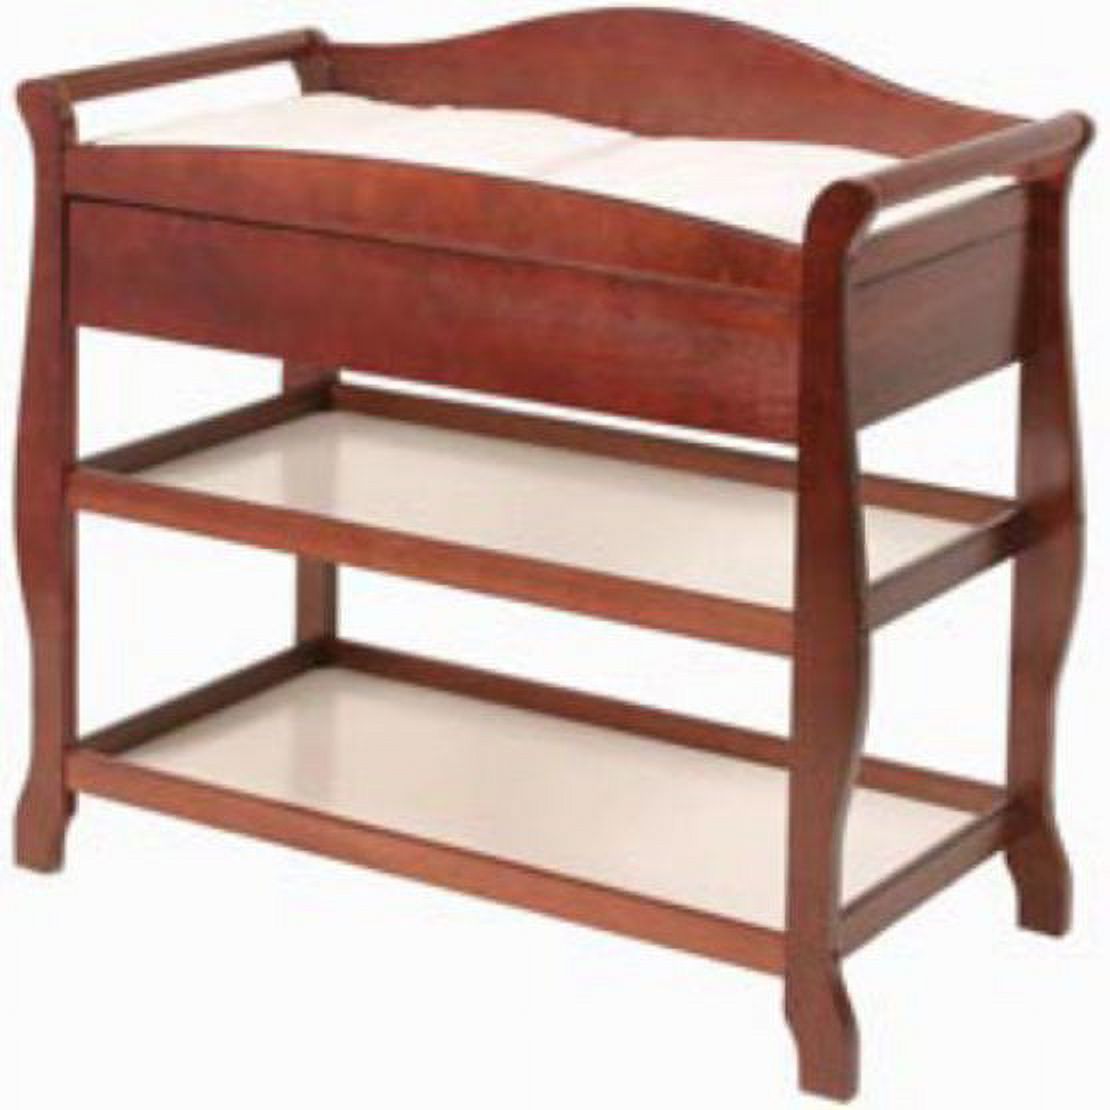 Storkcraft Aspen Changing Table with Drawer Cherry - image 5 of 9